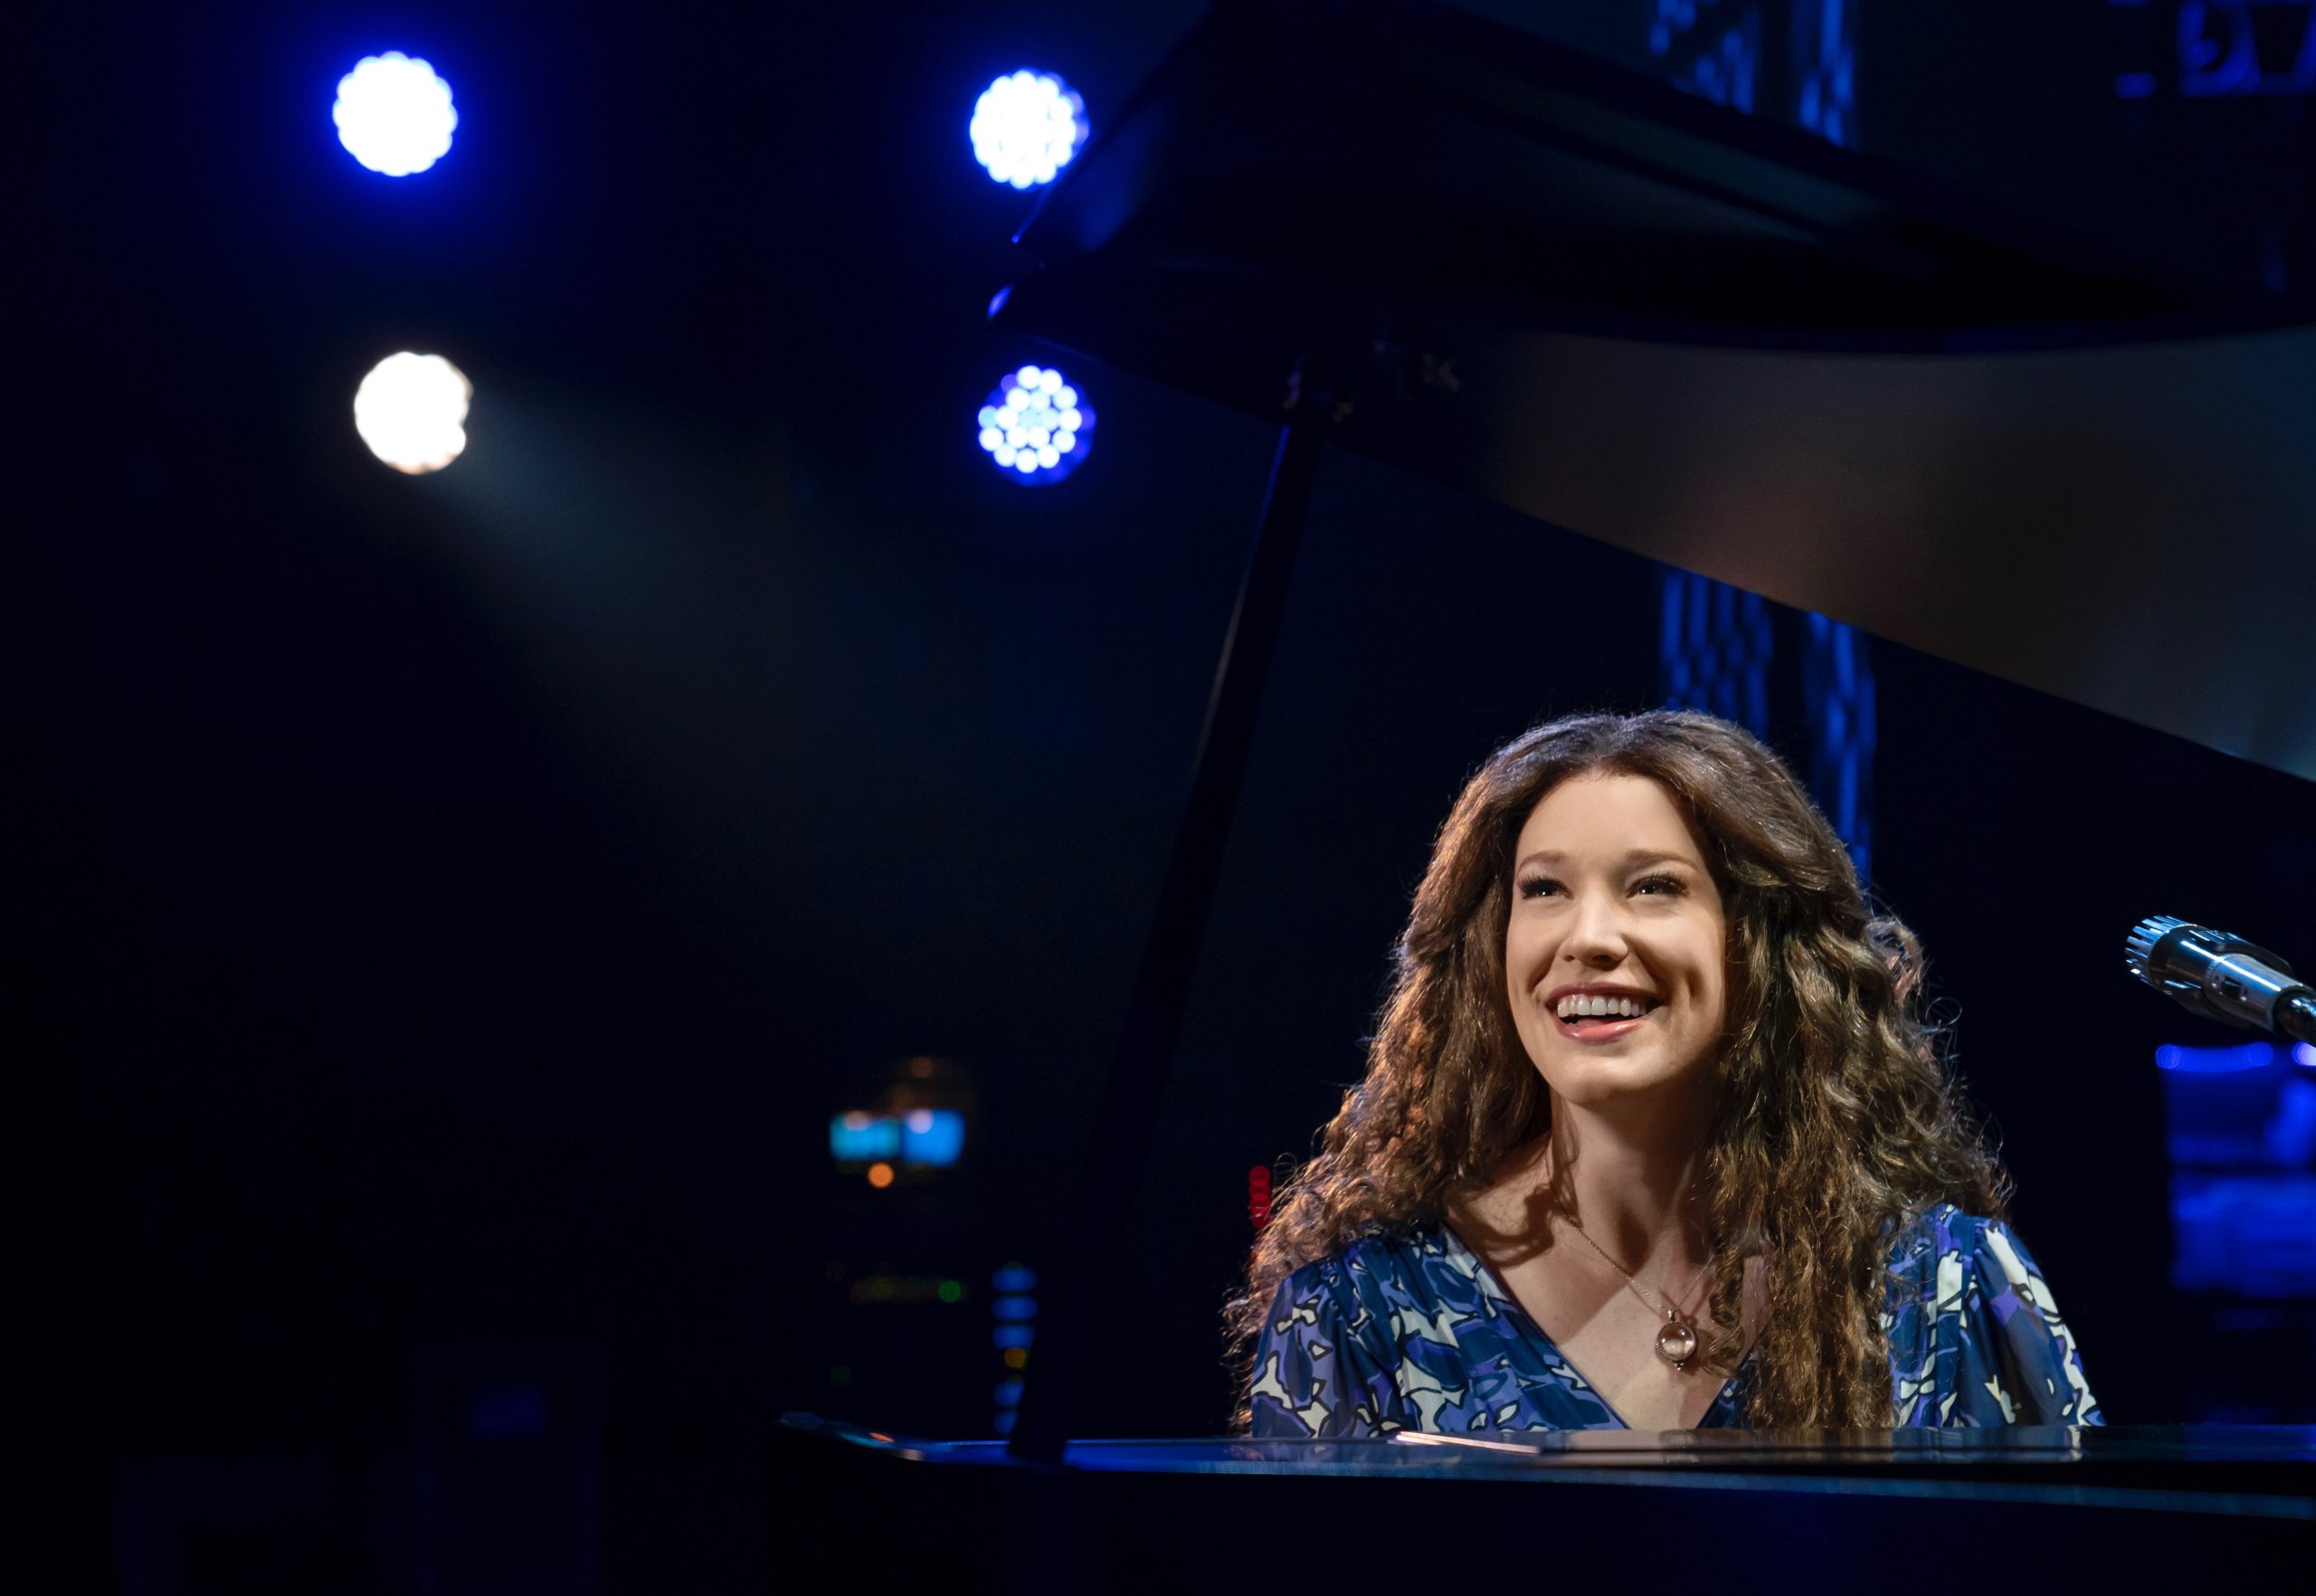 Kennedy Caughell plays Carole King in the traveling production of 'Beautiful.' (Photo: Joan Marcus)